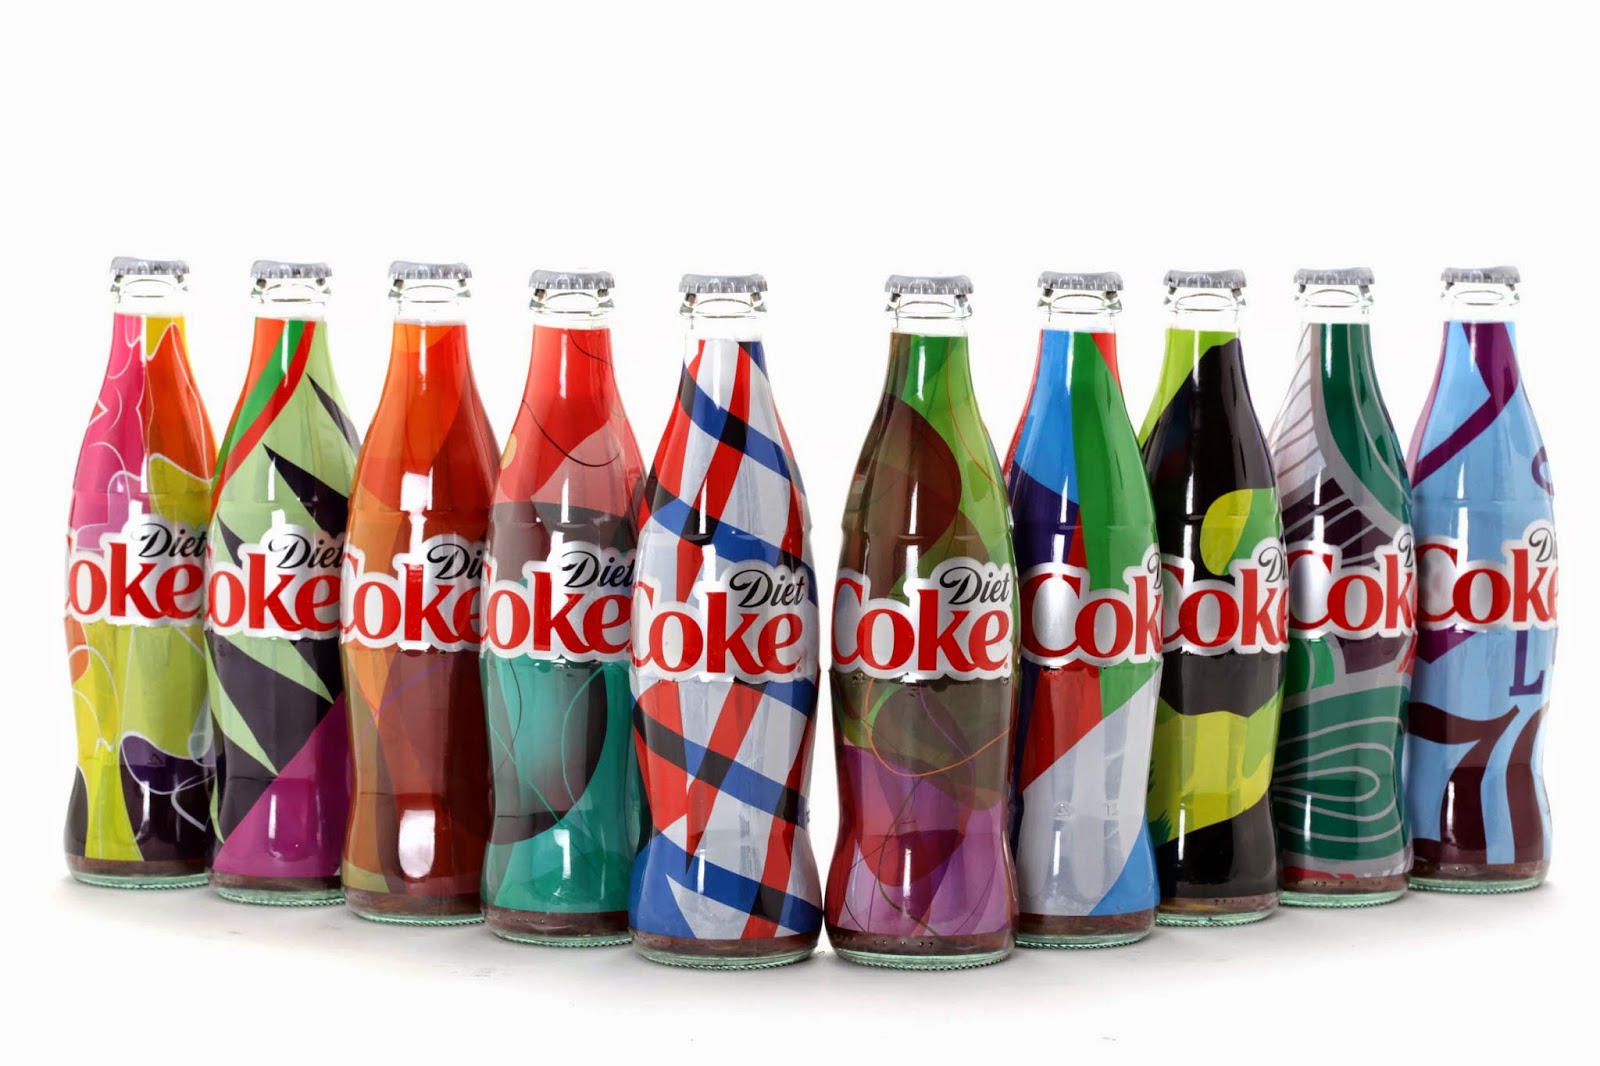 A bottle Diet Coke fans can call their own